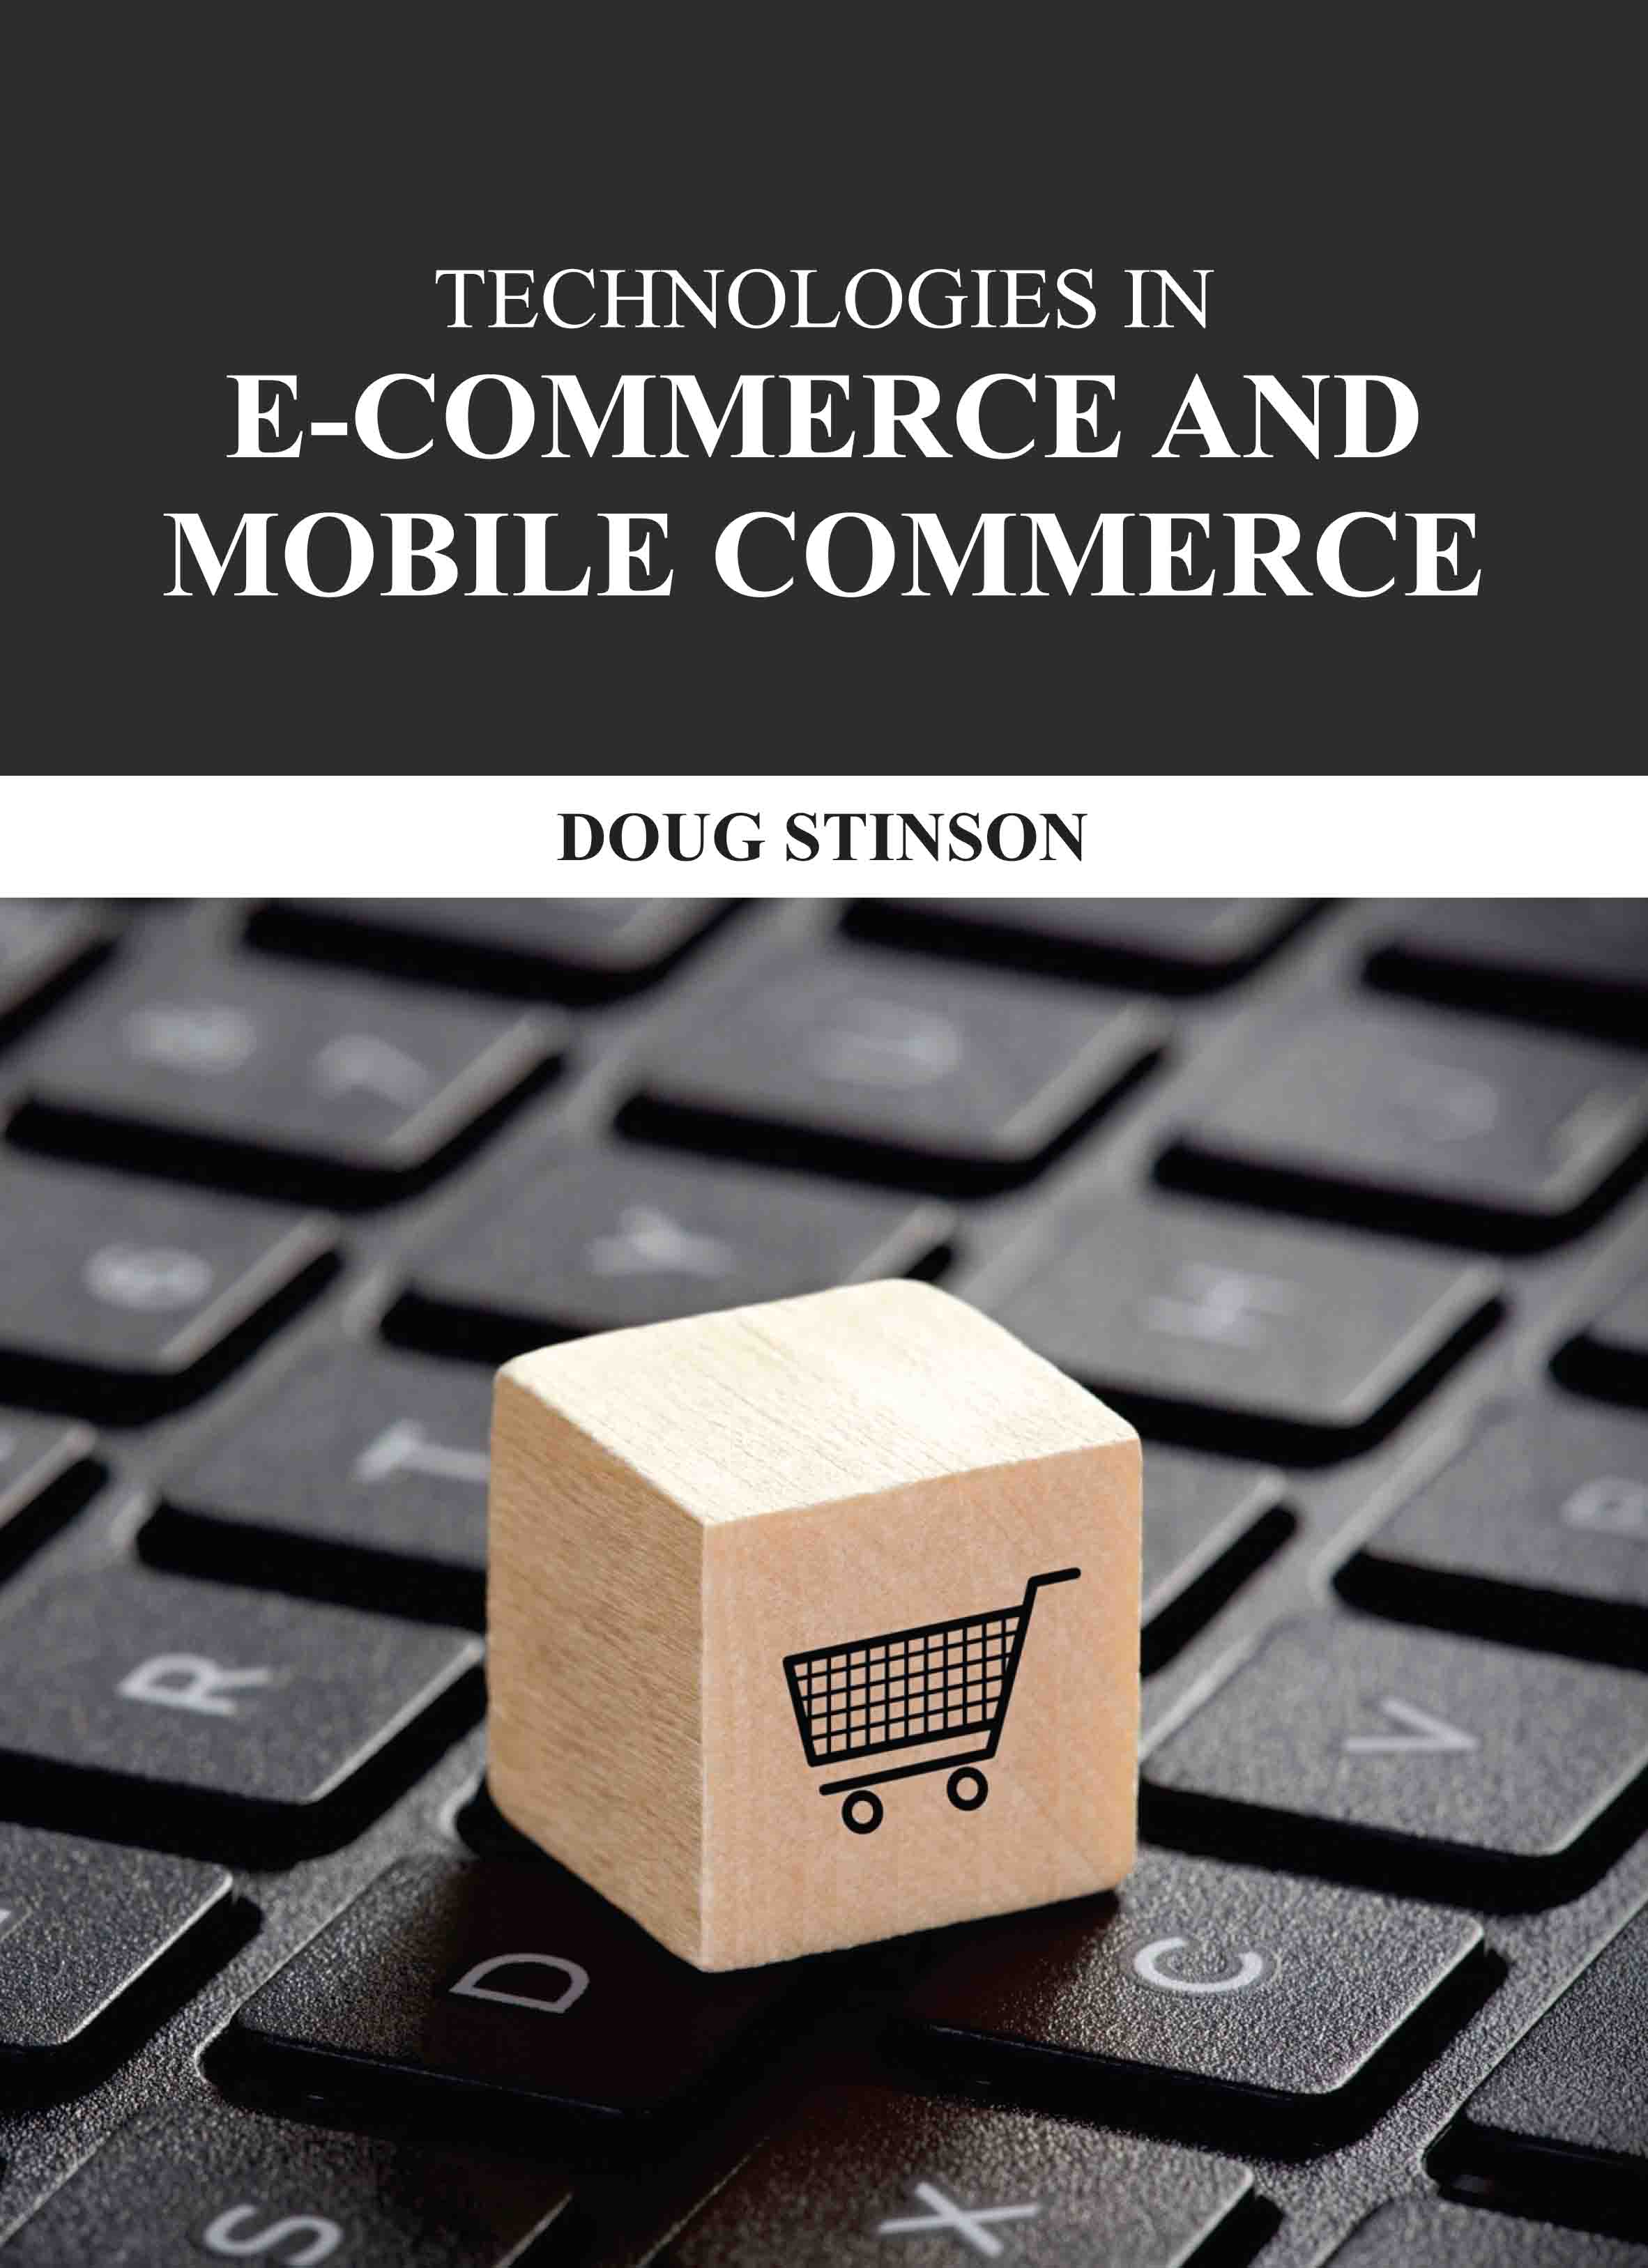 Technologies in Ecommerce and Mobile Commerce